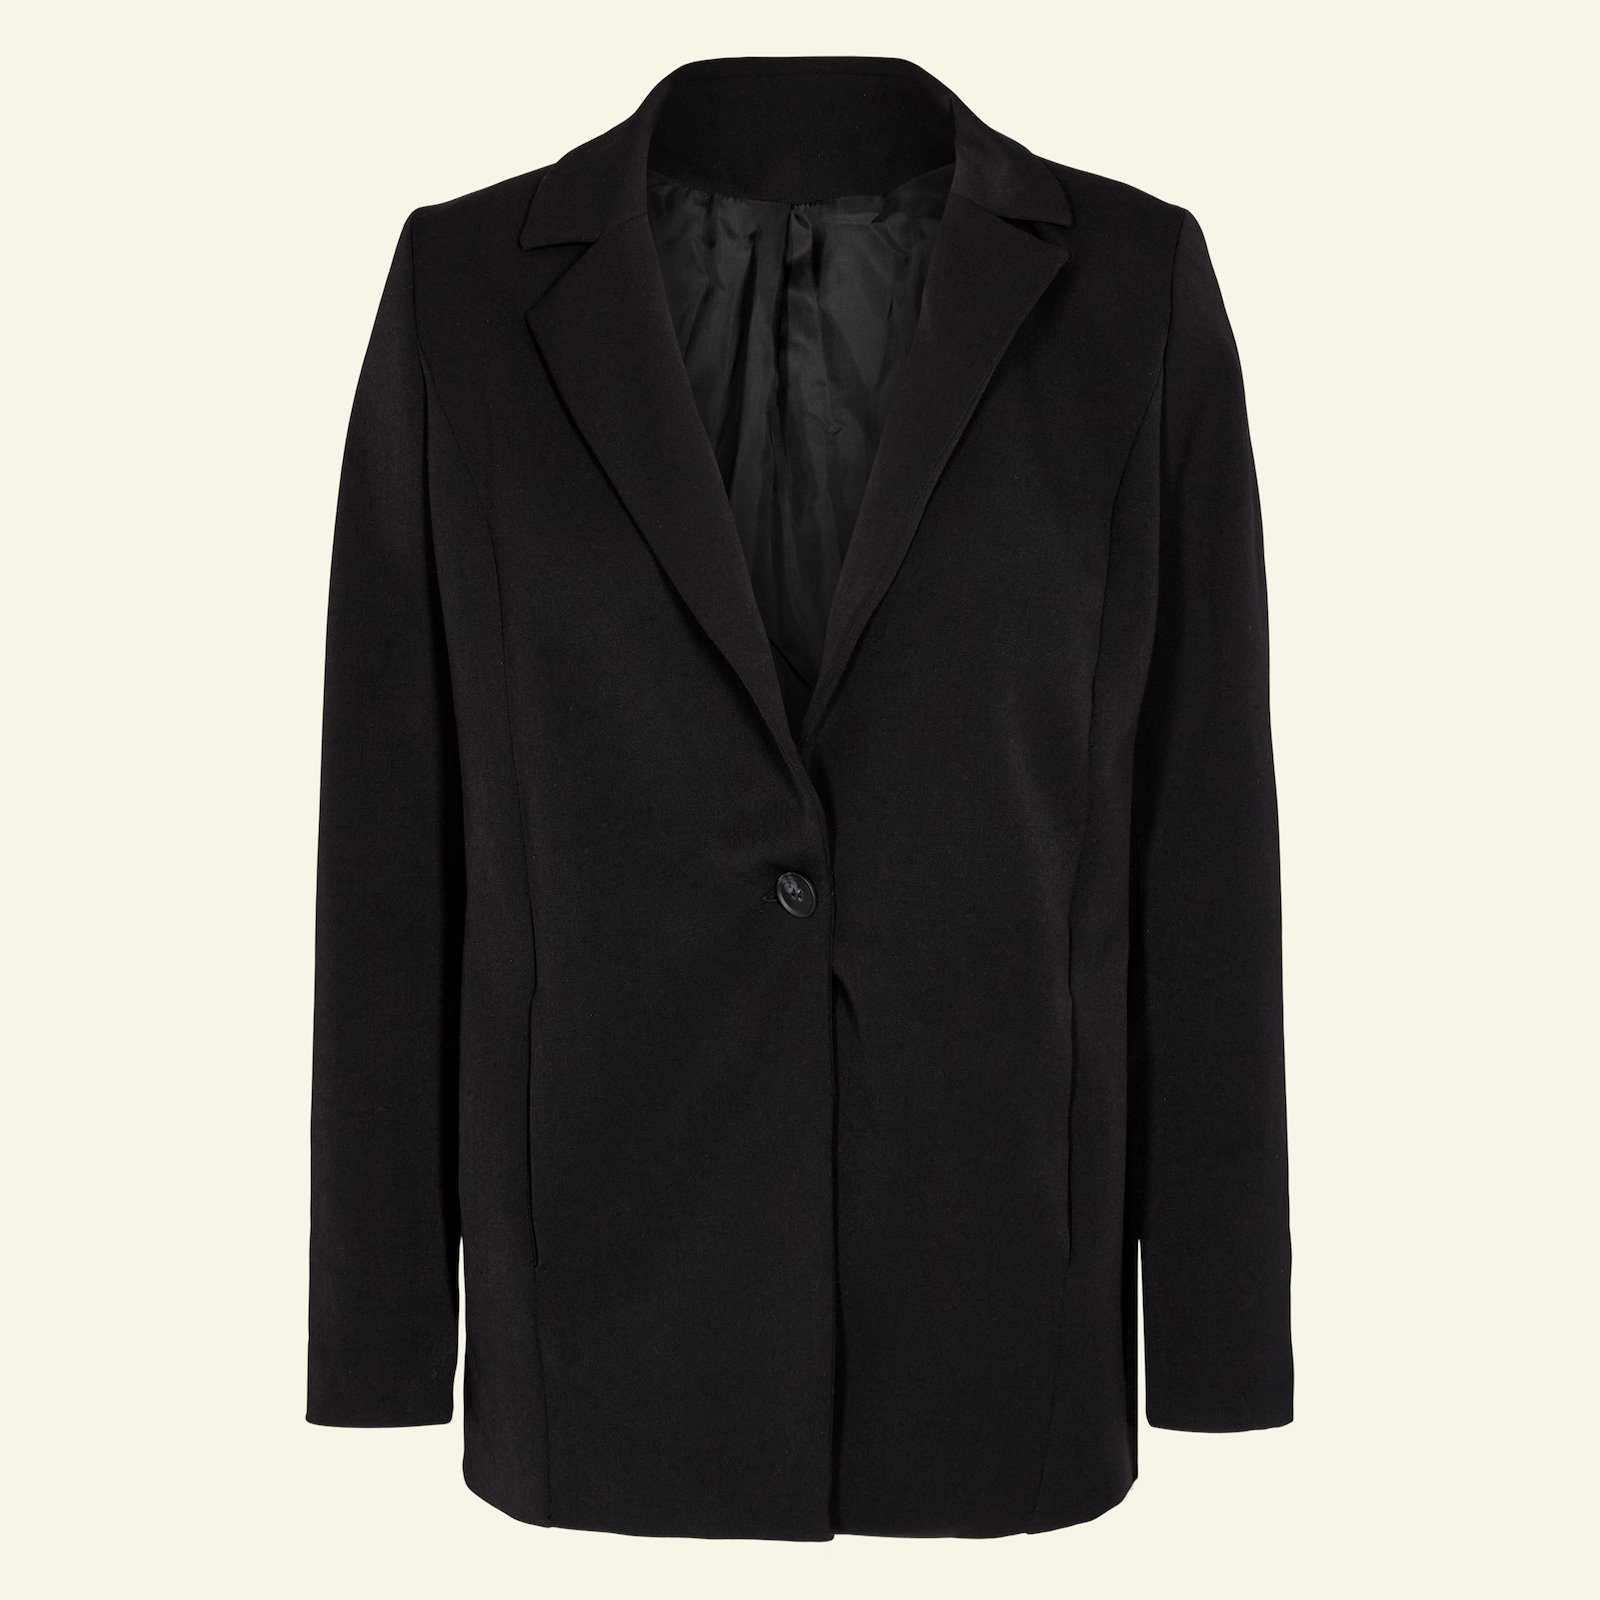 Suit jacket with lining, 44/16 p24048_460563_5043_40237_sskit